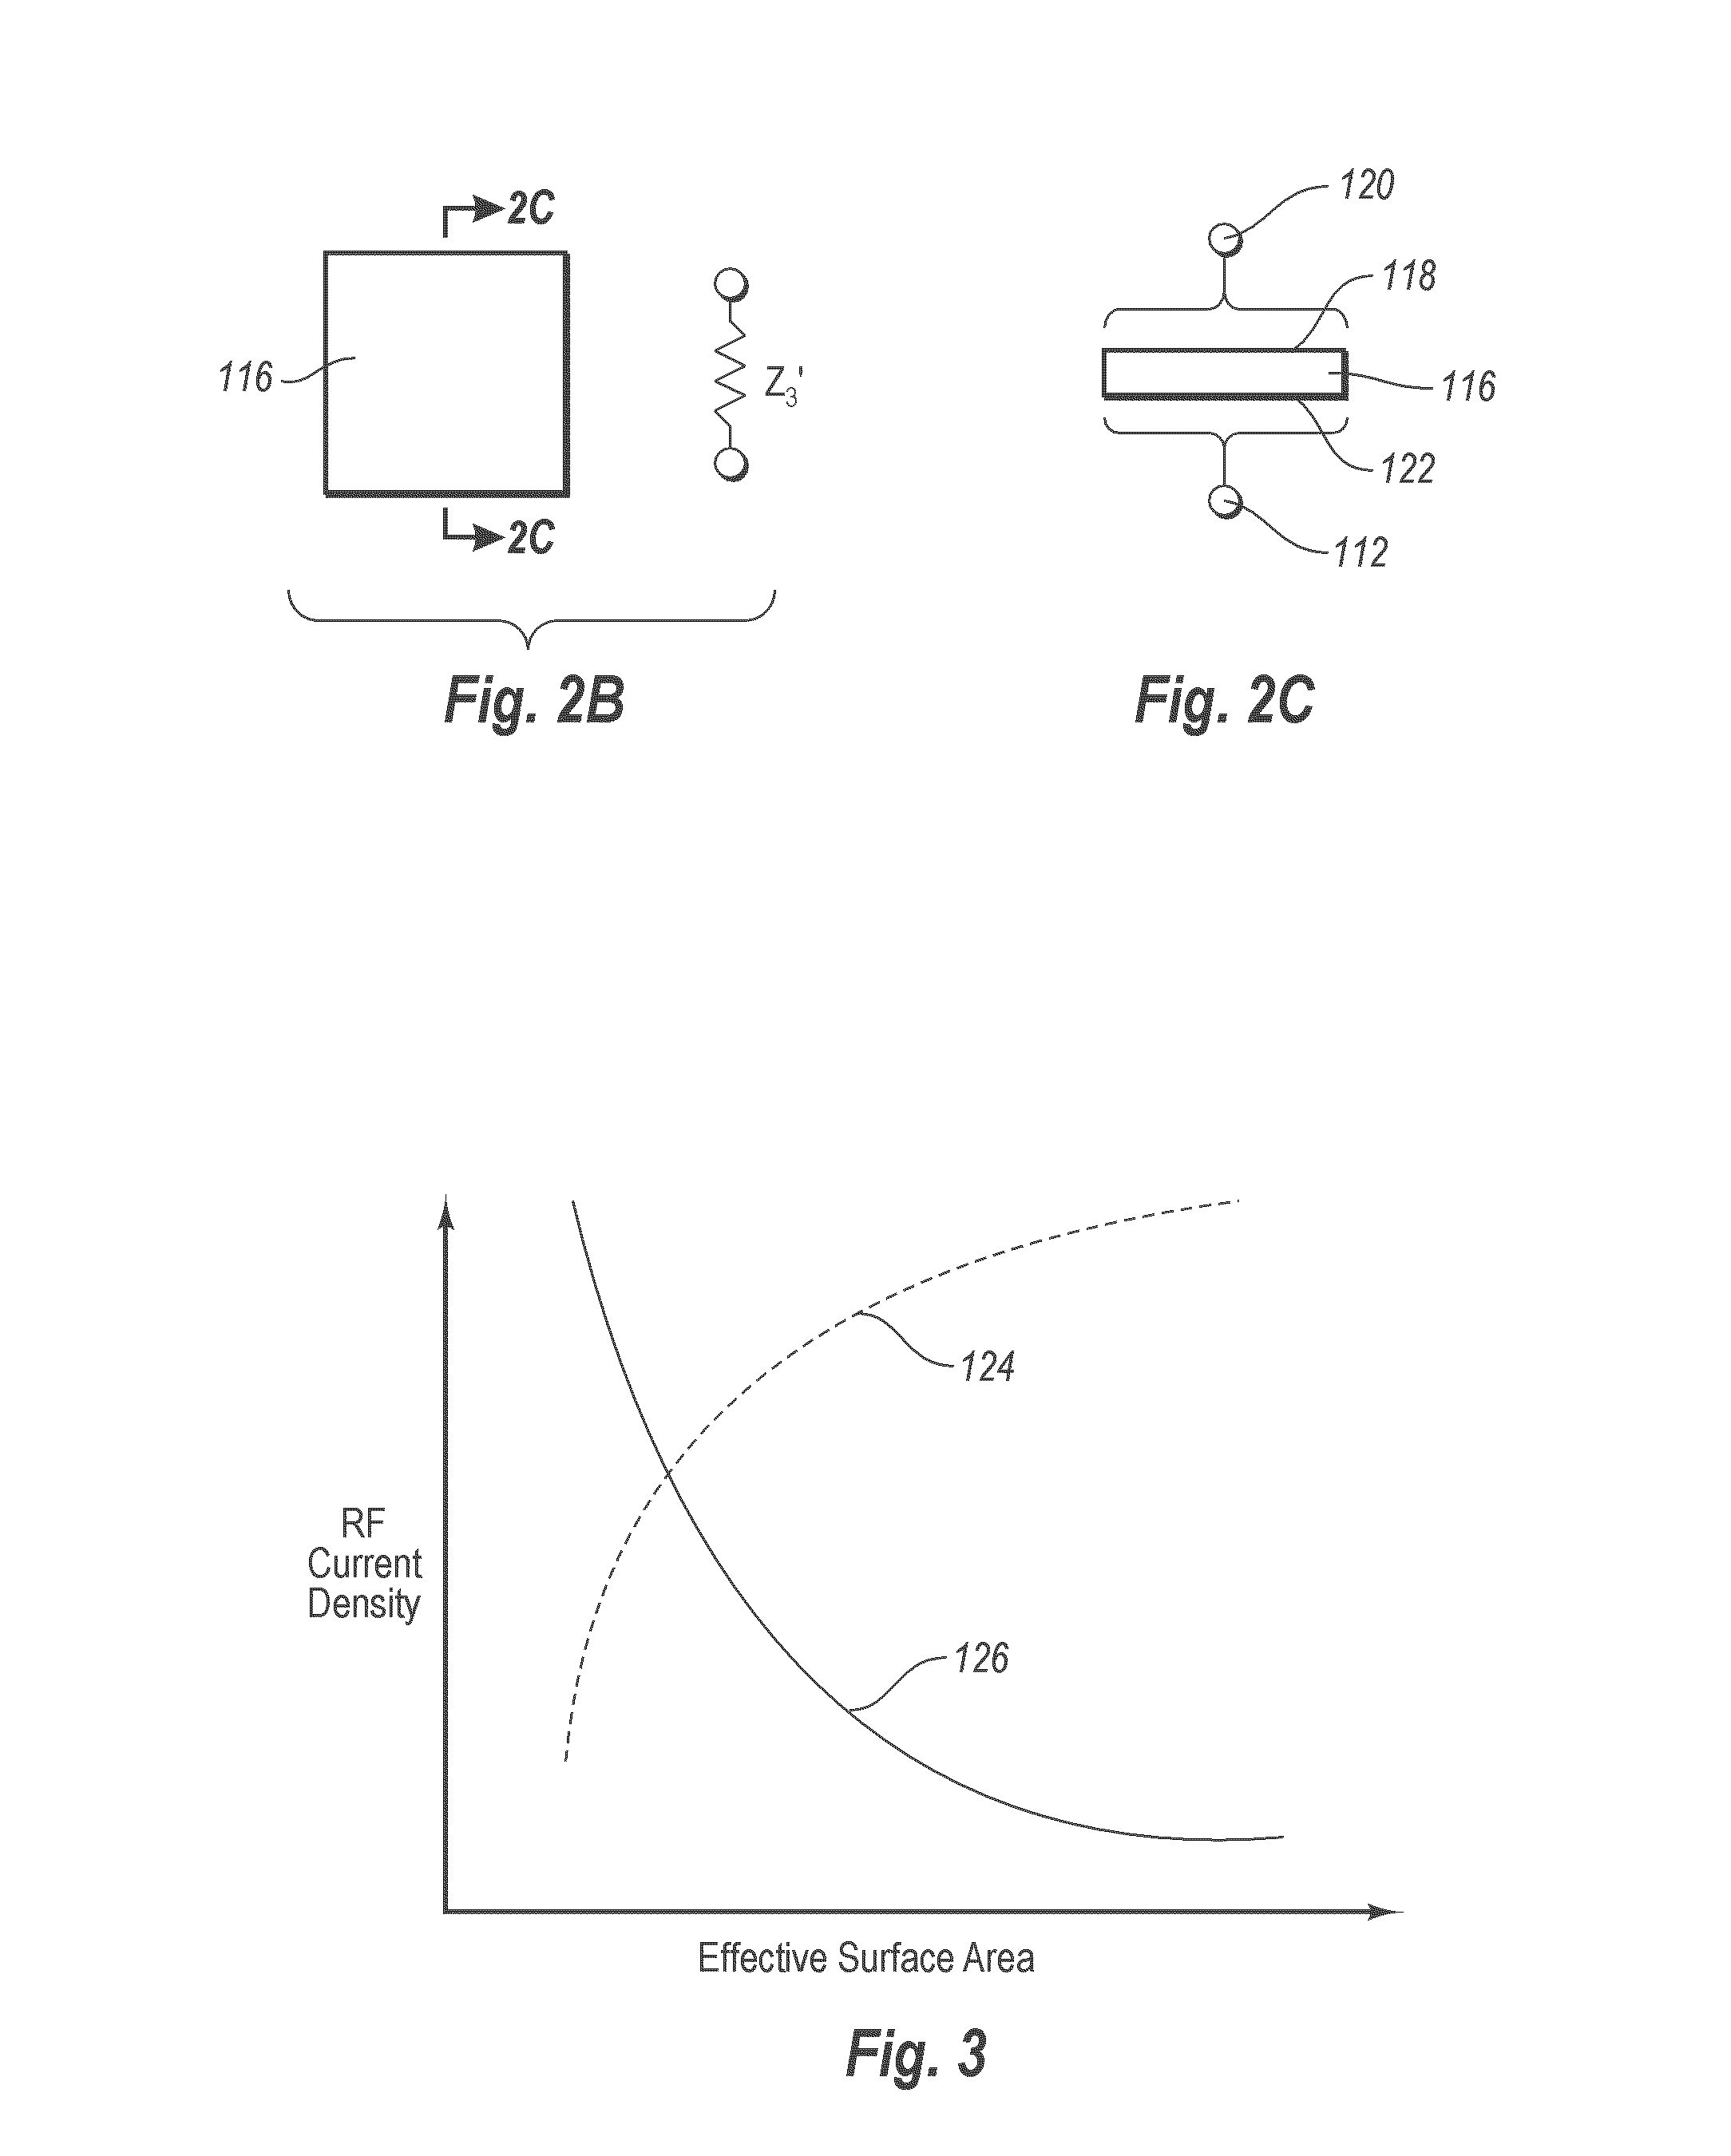 Self-limiting electrosurgical return electrode with pressure sore reduction and heating capabilities